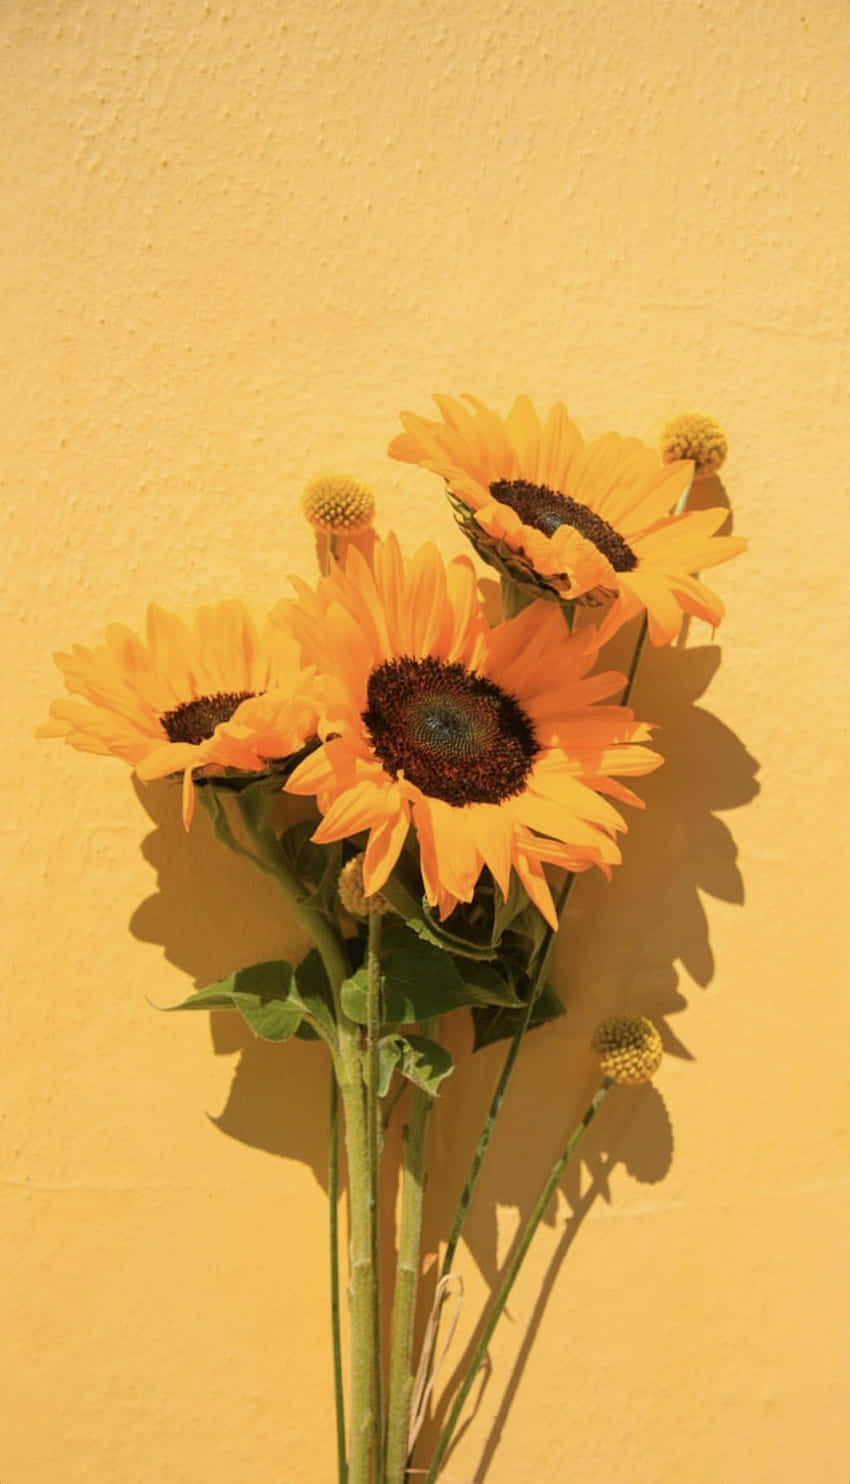 Bright Yellow Sunflowers Blooming in the Sun Wallpaper